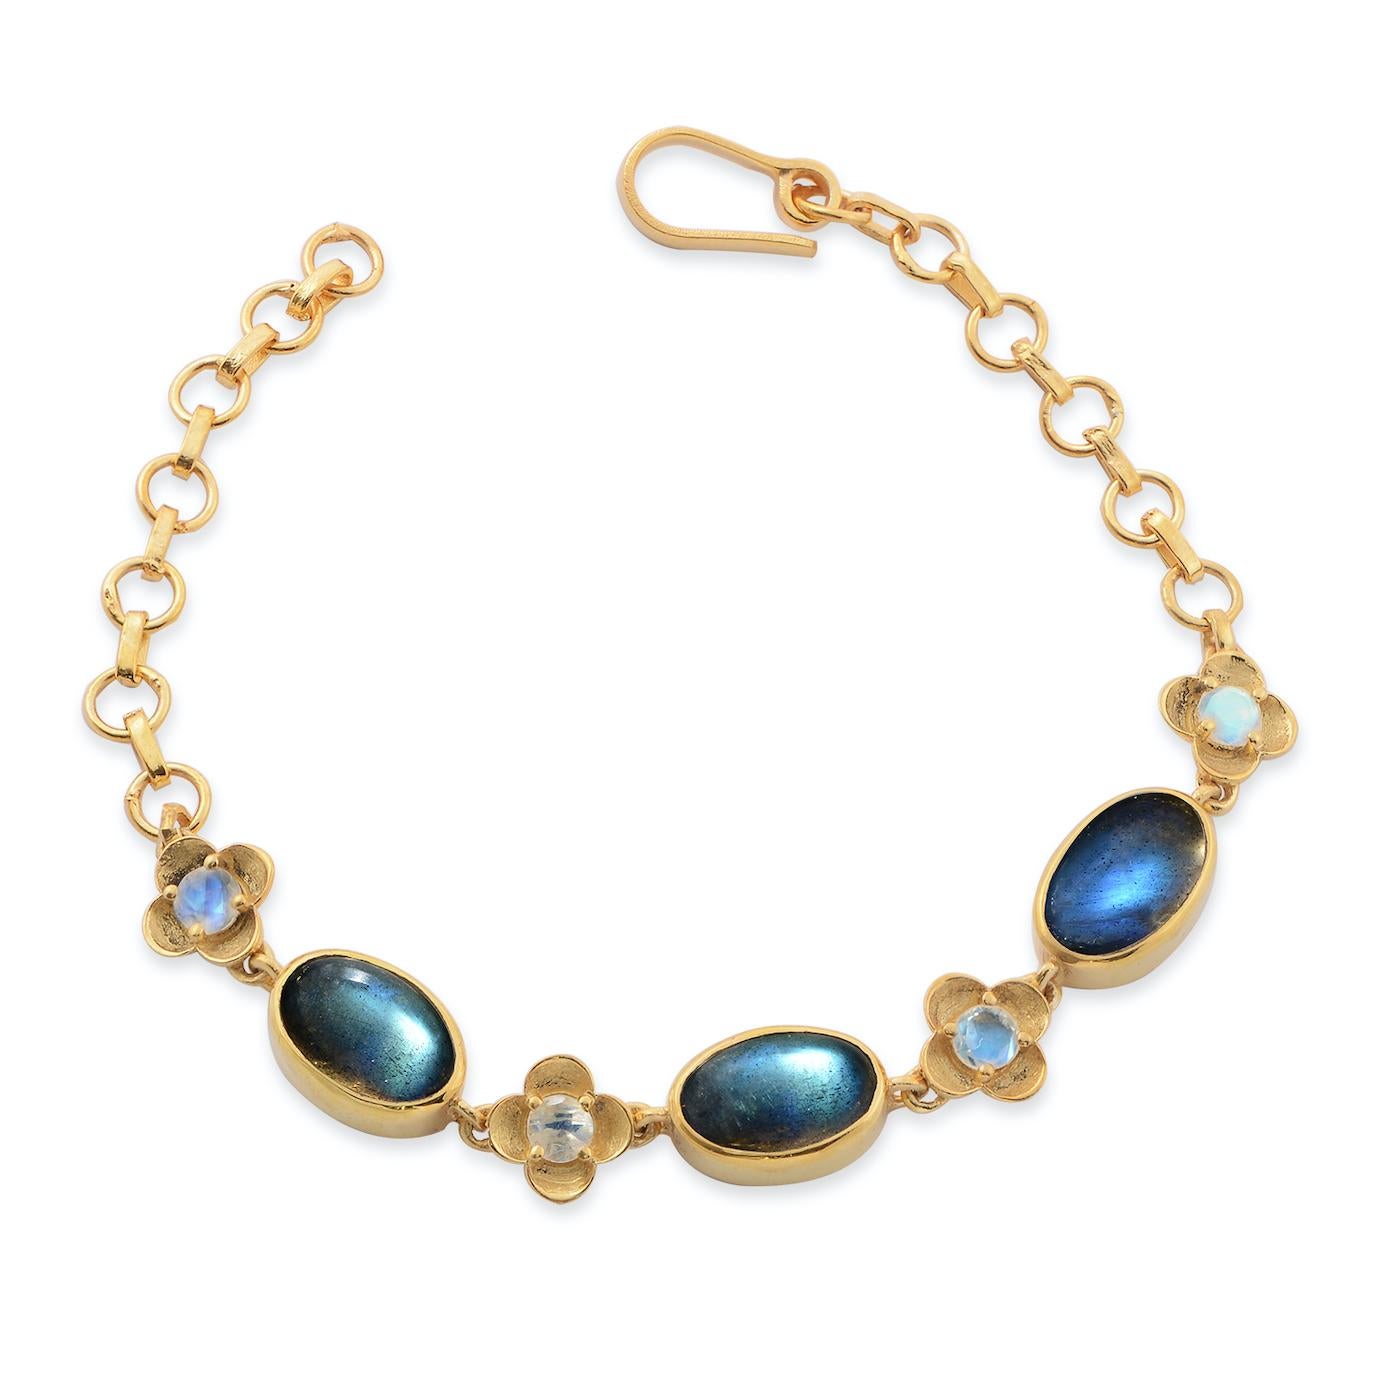 

This lovely bracelet has been handmade in our workshops. We have used labradorite and rainbow moonstone gemstones in this bracelet.

The bracelet is made in sterling silver coated with 24ct gold vermeil, and is adjustable.

It has matching